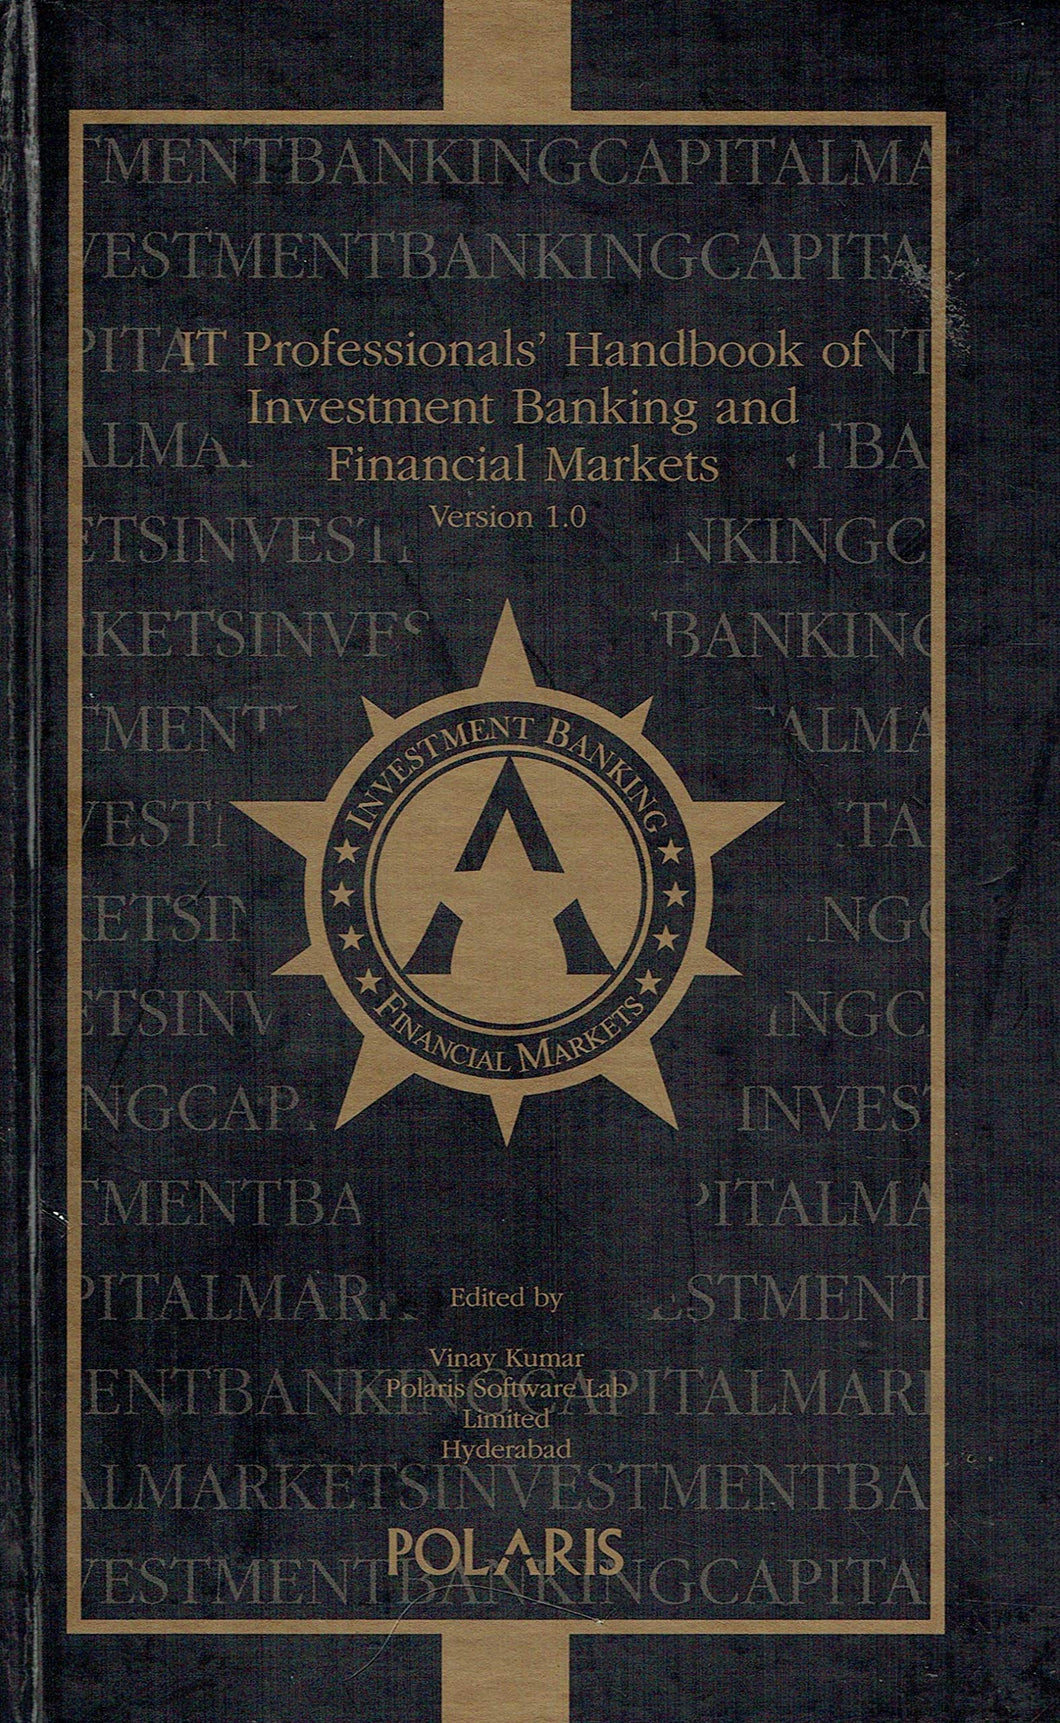 IT Professionals' Handbook of Investment Banking and Financial Markets, Version 1.0